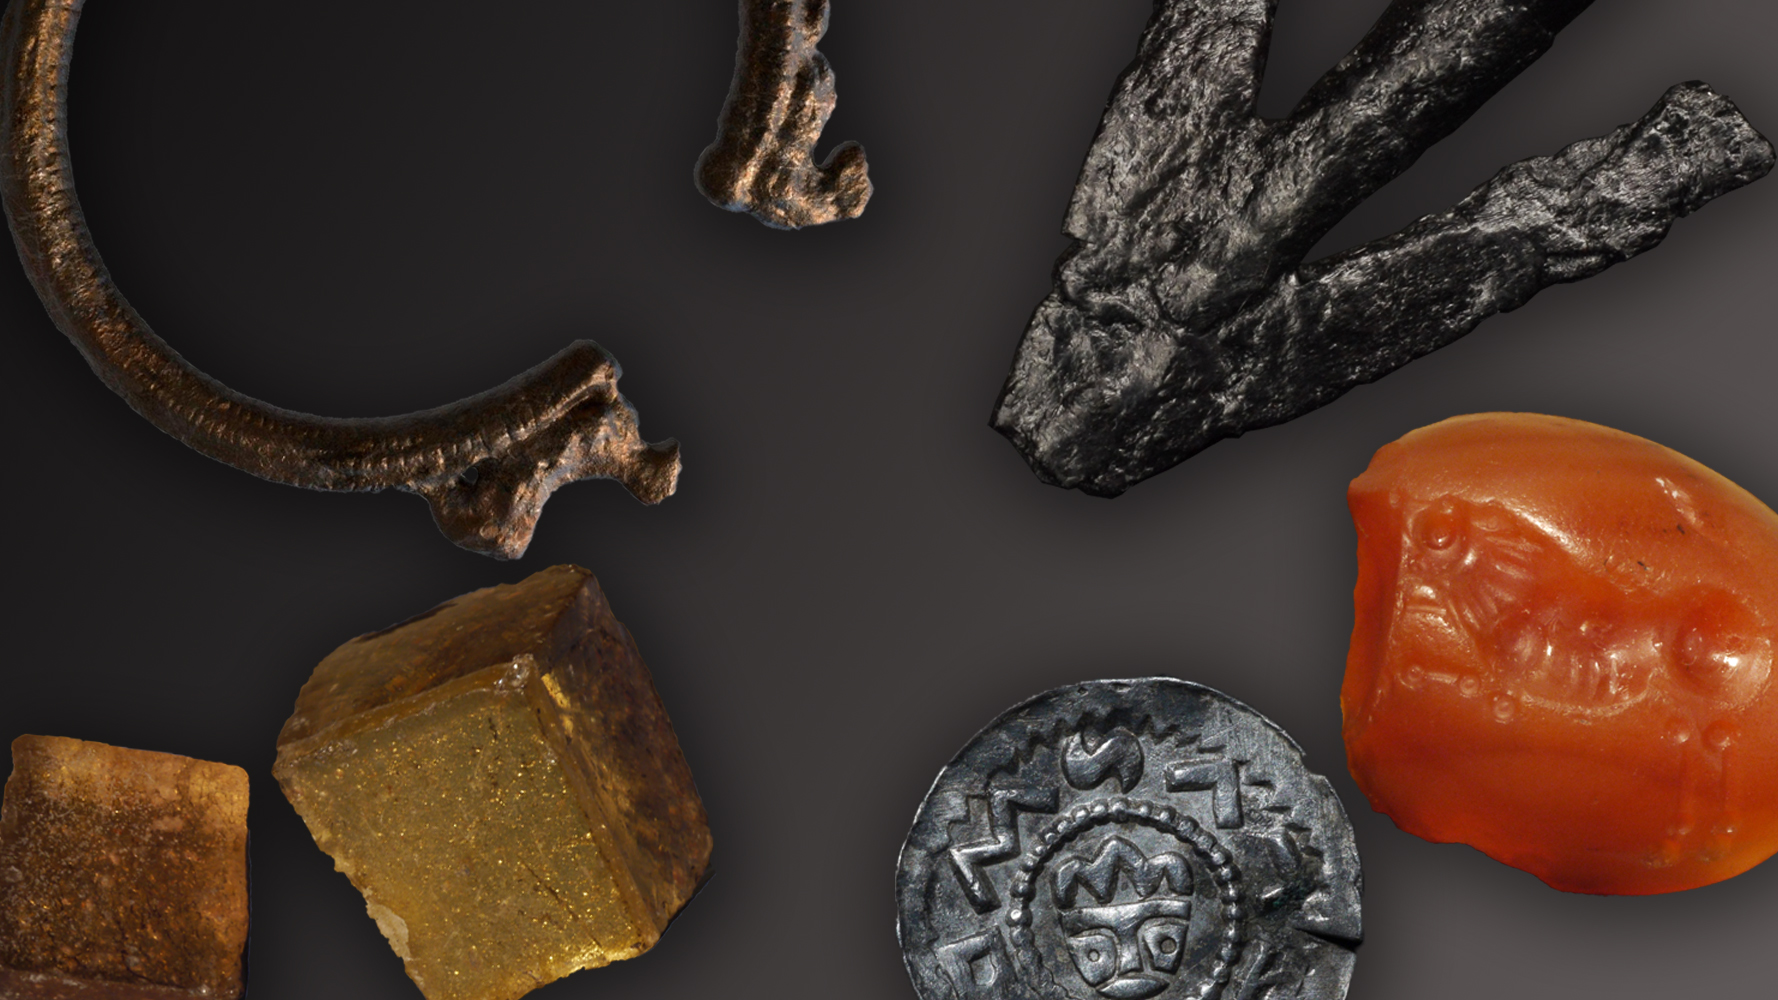 New permanent exhibition of finds from Ostrów Tumski